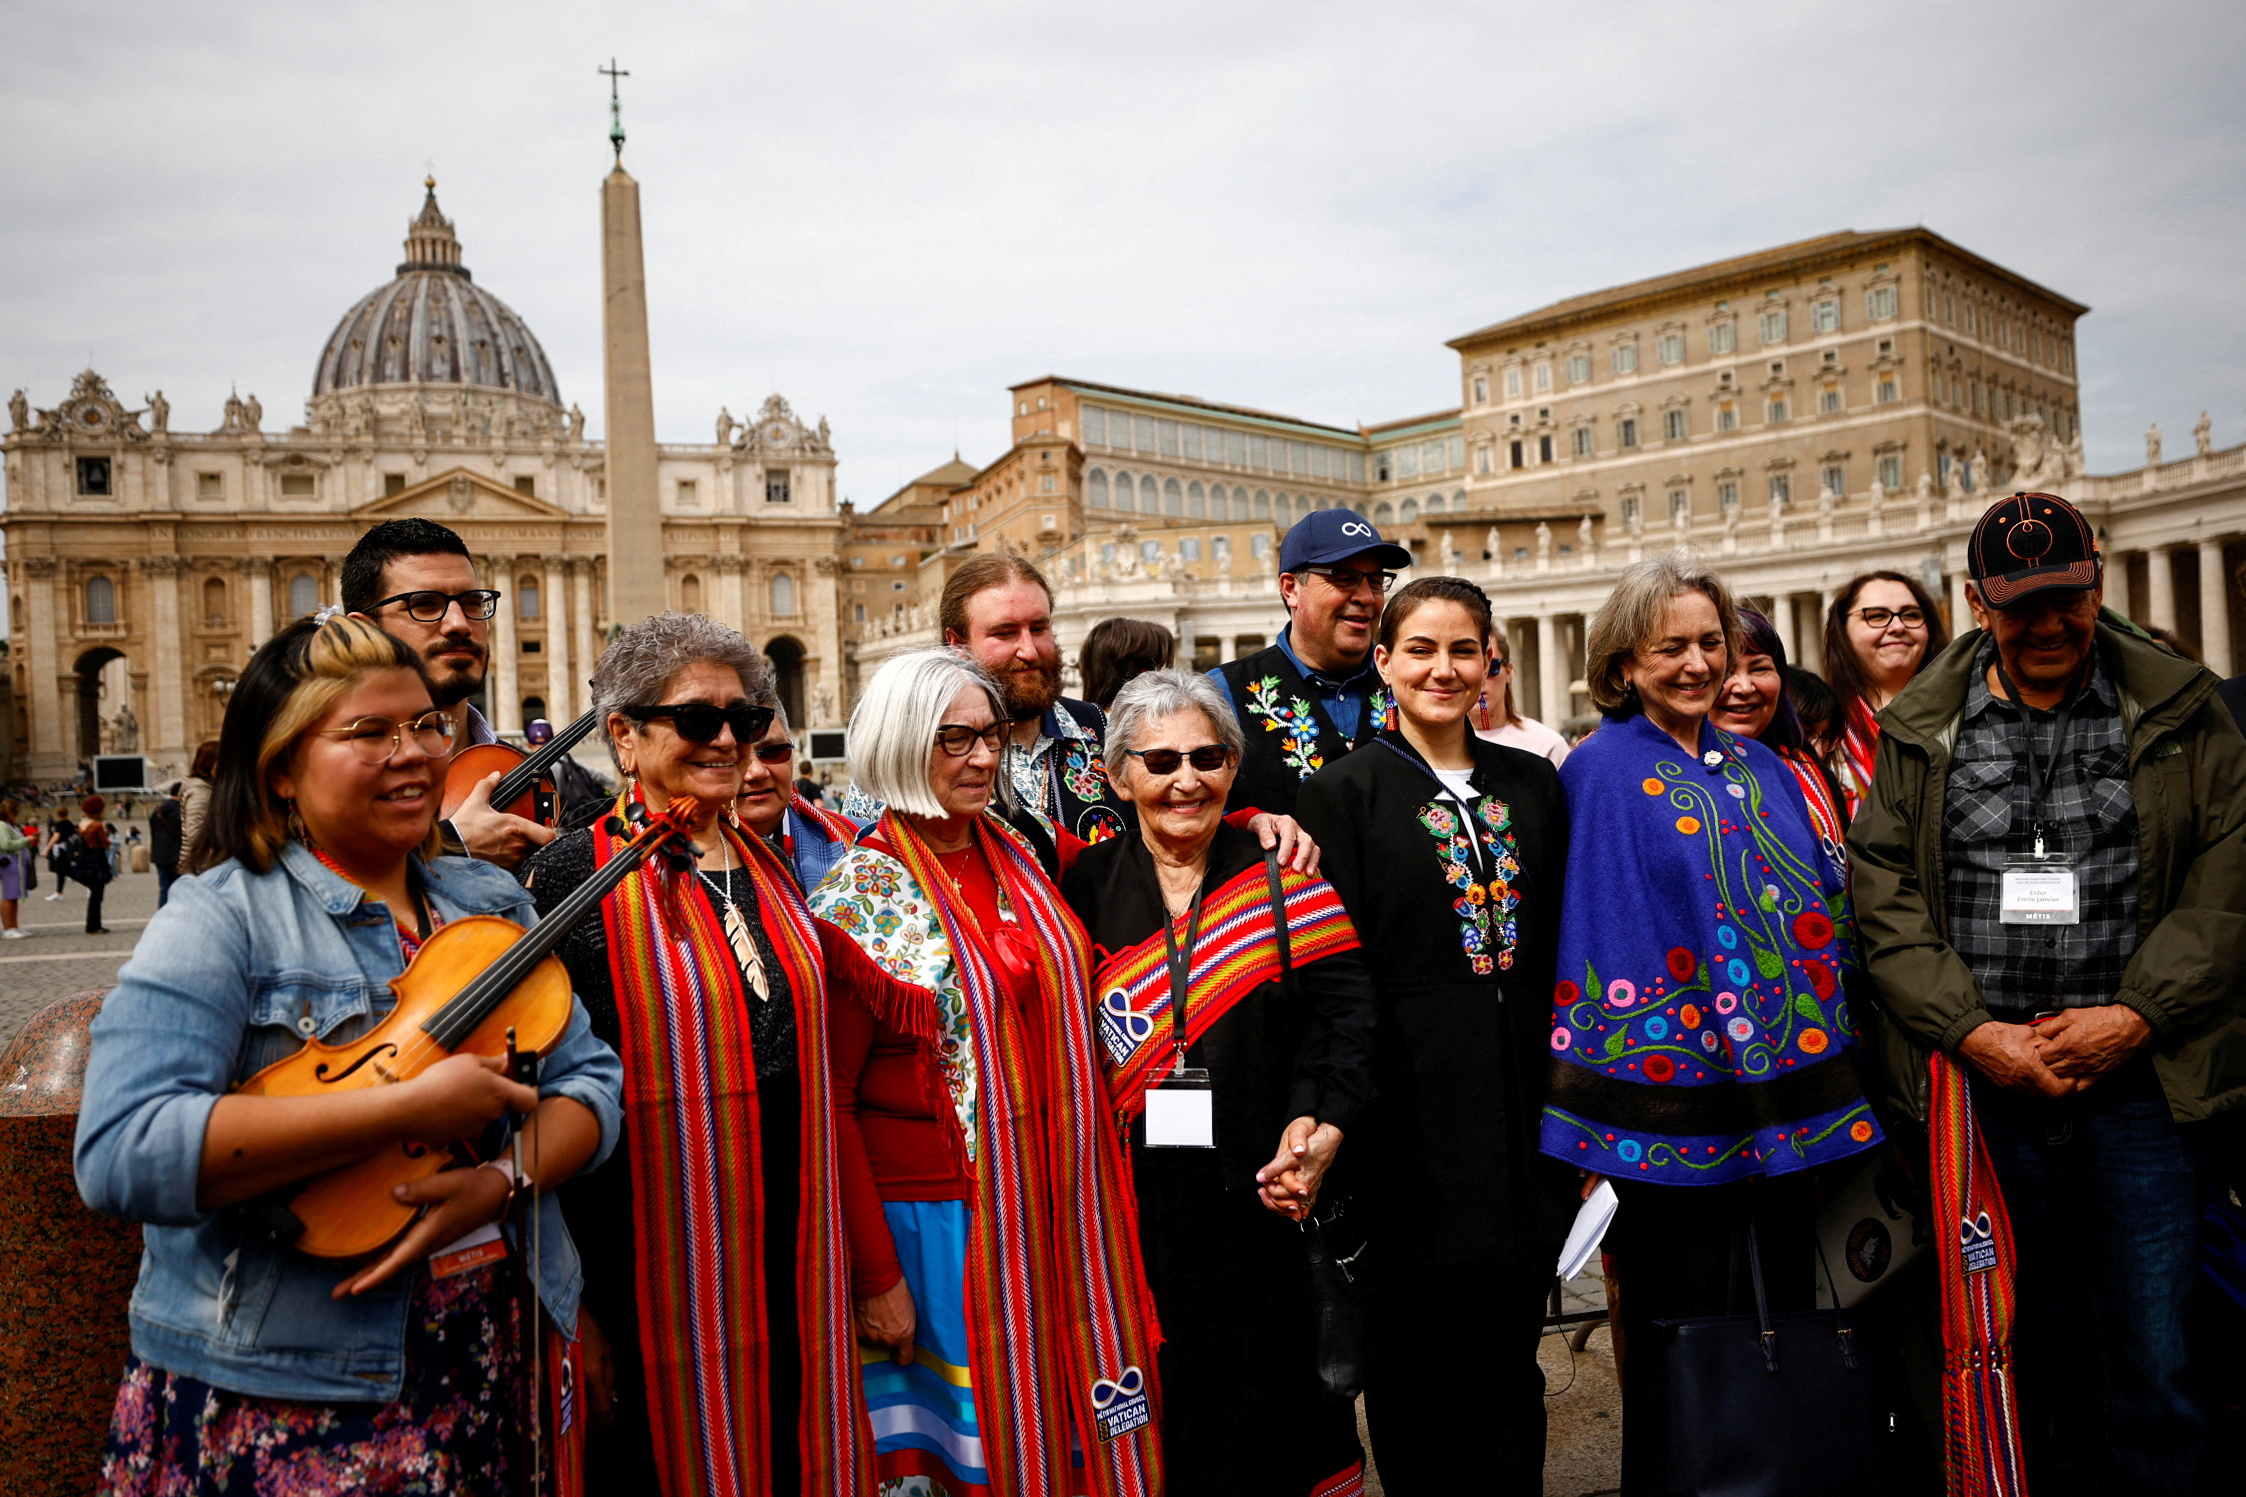 PHOTO: Metis National Council president Cassidy Caron poses for a group picture alongside Metis residential school survivor Angie Crerar and other delegates from Canada's indigenous peoples near St. Peter's Square at the Vatican, March 28, 2022.